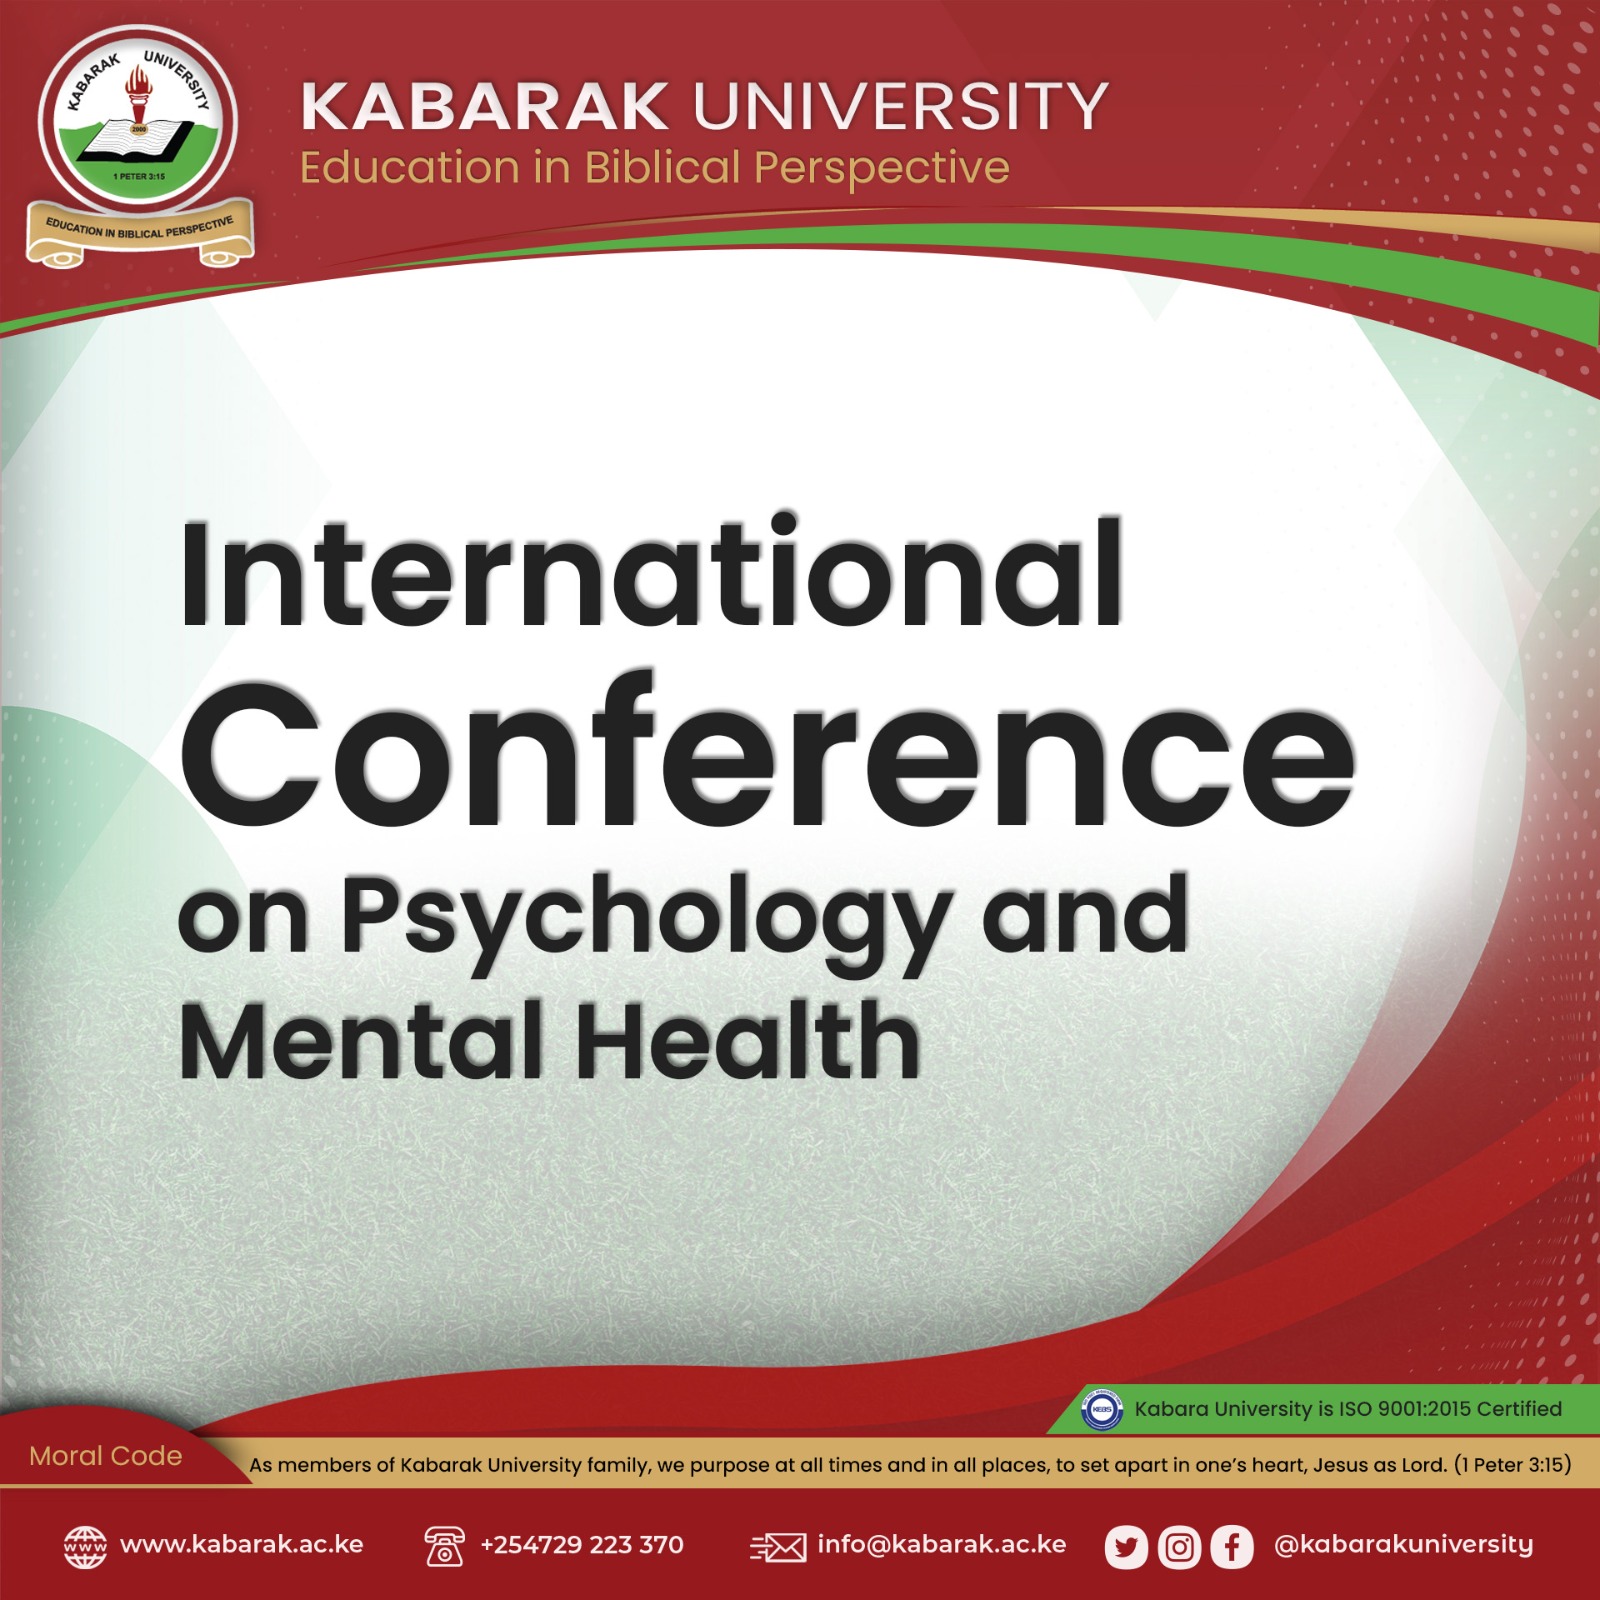 					View 2023: The International Conference on Psychology and Mental Health
				